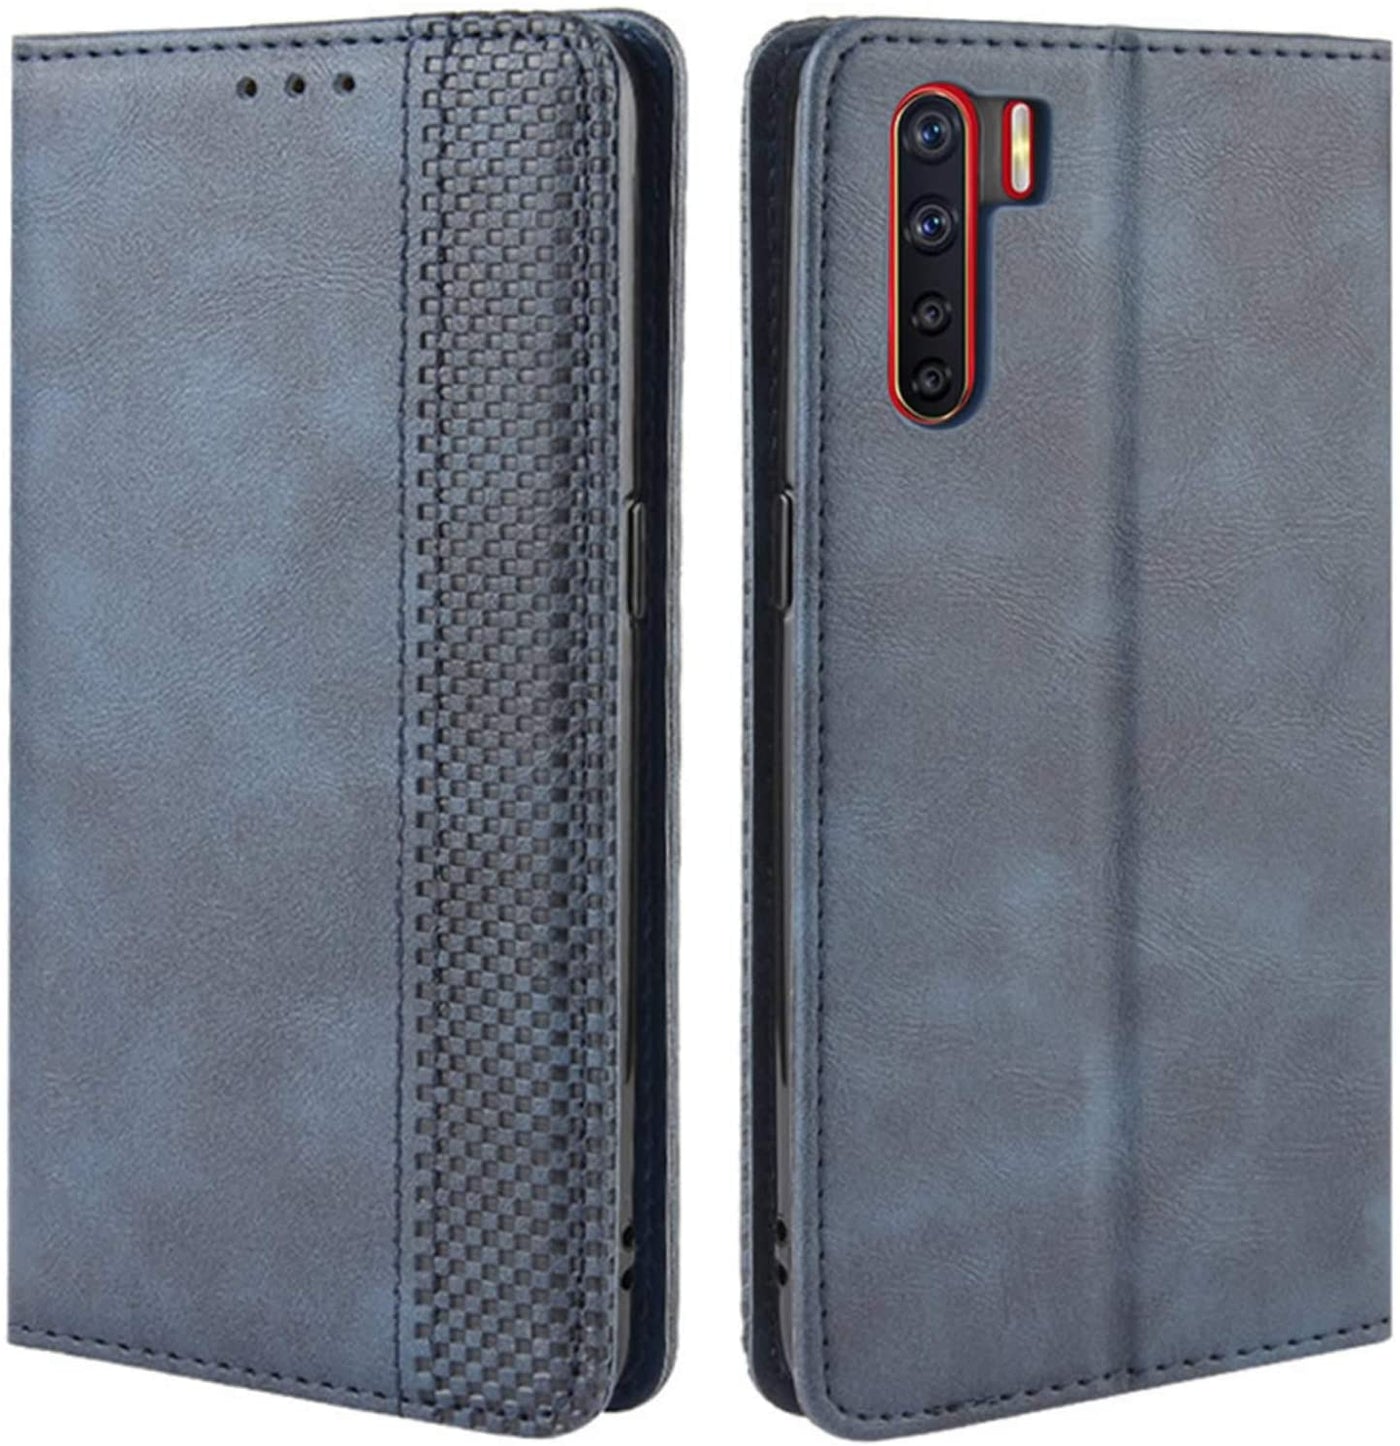 Oppo F15 blue color leather wallet flip cover case By excelsior